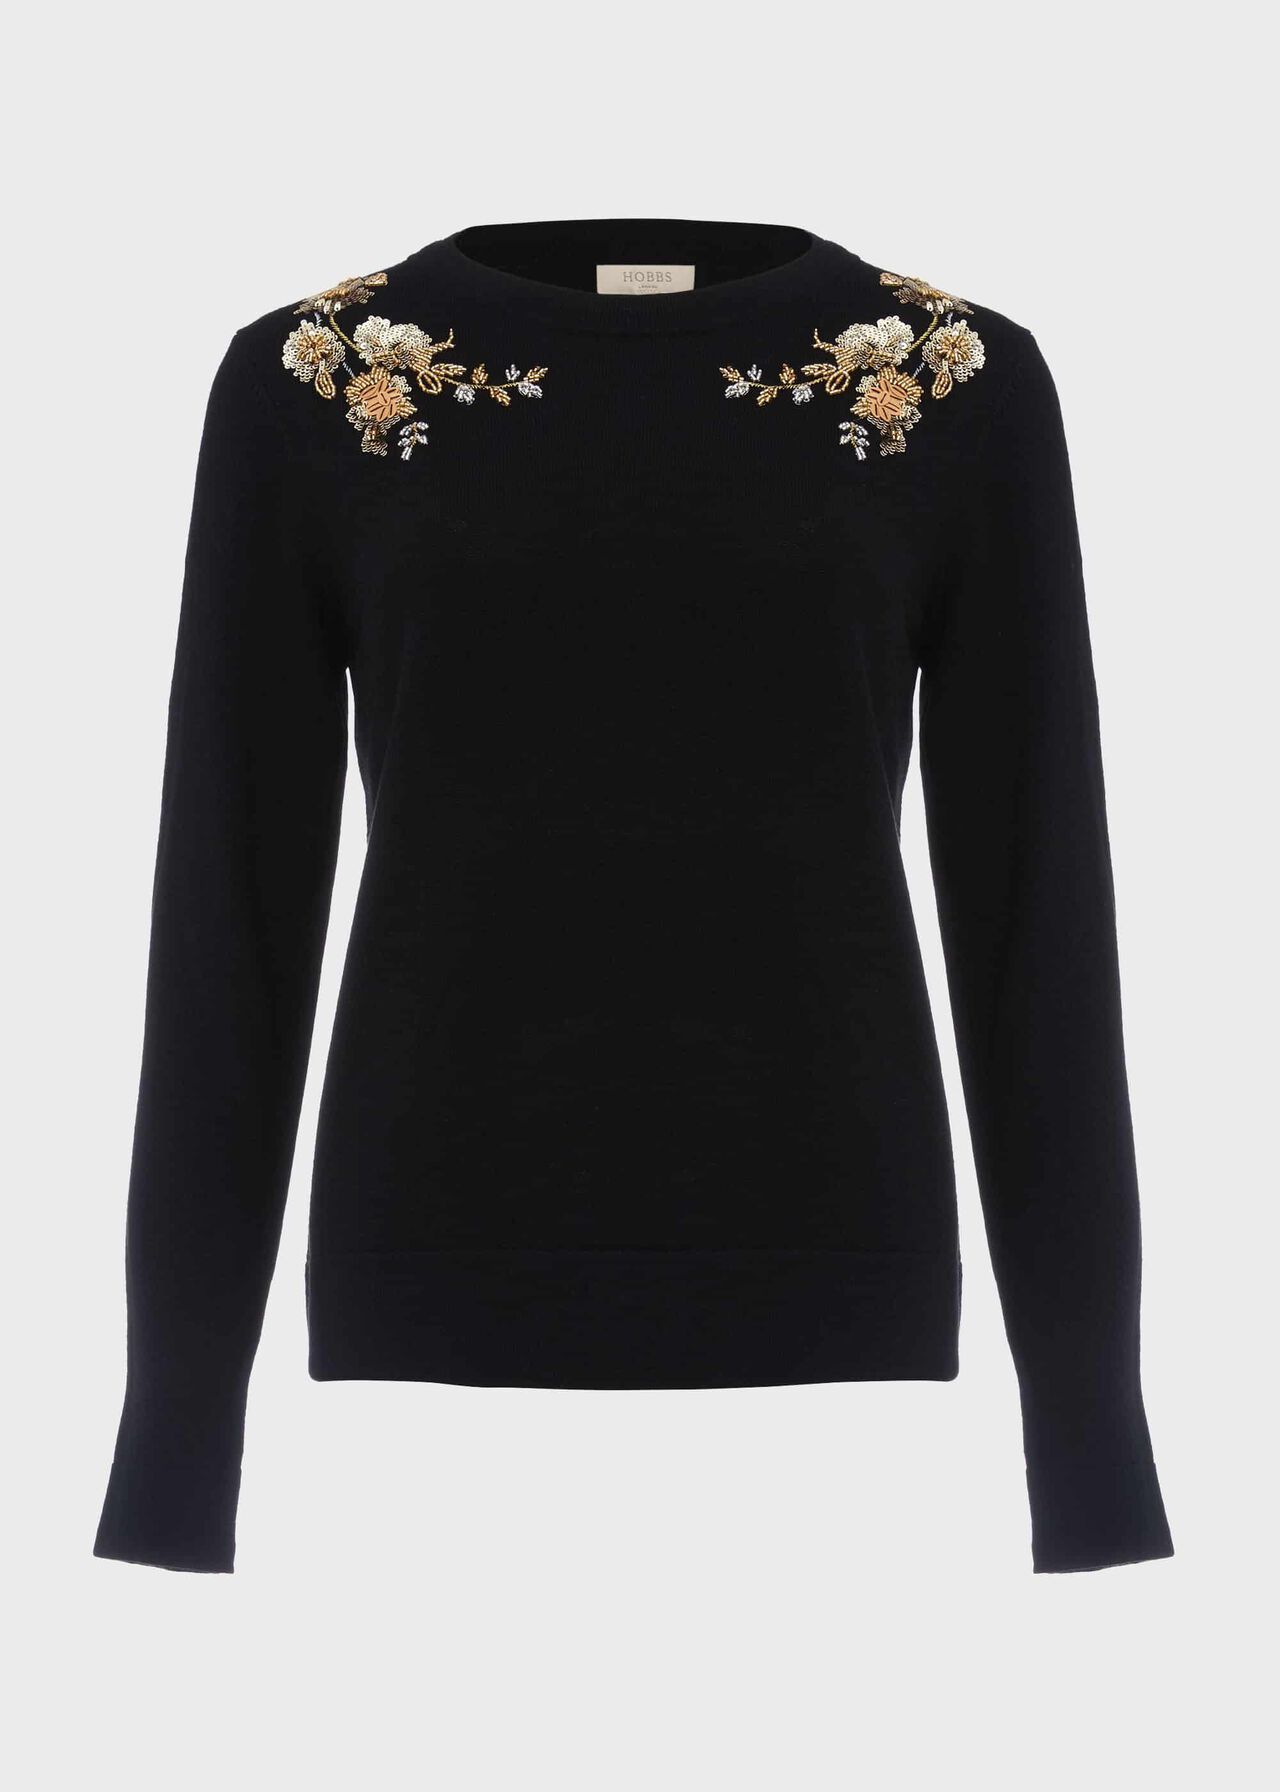 Louise Embroidered Jumper